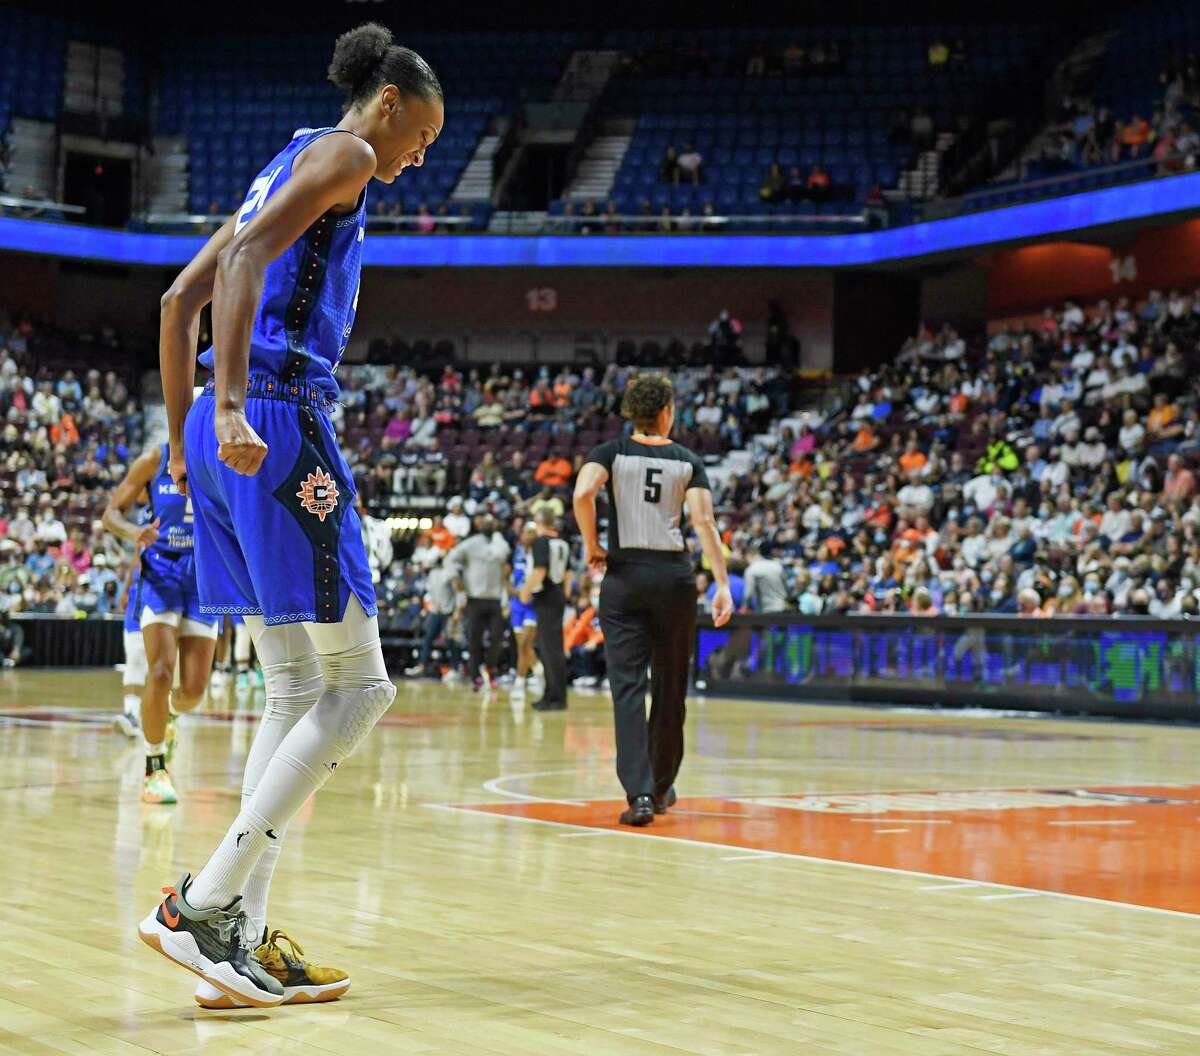 Connecticut Sun forward DeWanna Bonner limps toward the sideline after injuring her back early in the game against the Atlanta Dream in WNBA basketball action Sunday, Sept. 19, 2021 at Mohegan Sun Arena in Uncasville, Conn. (Sean D. Elliot/The Day via AP)